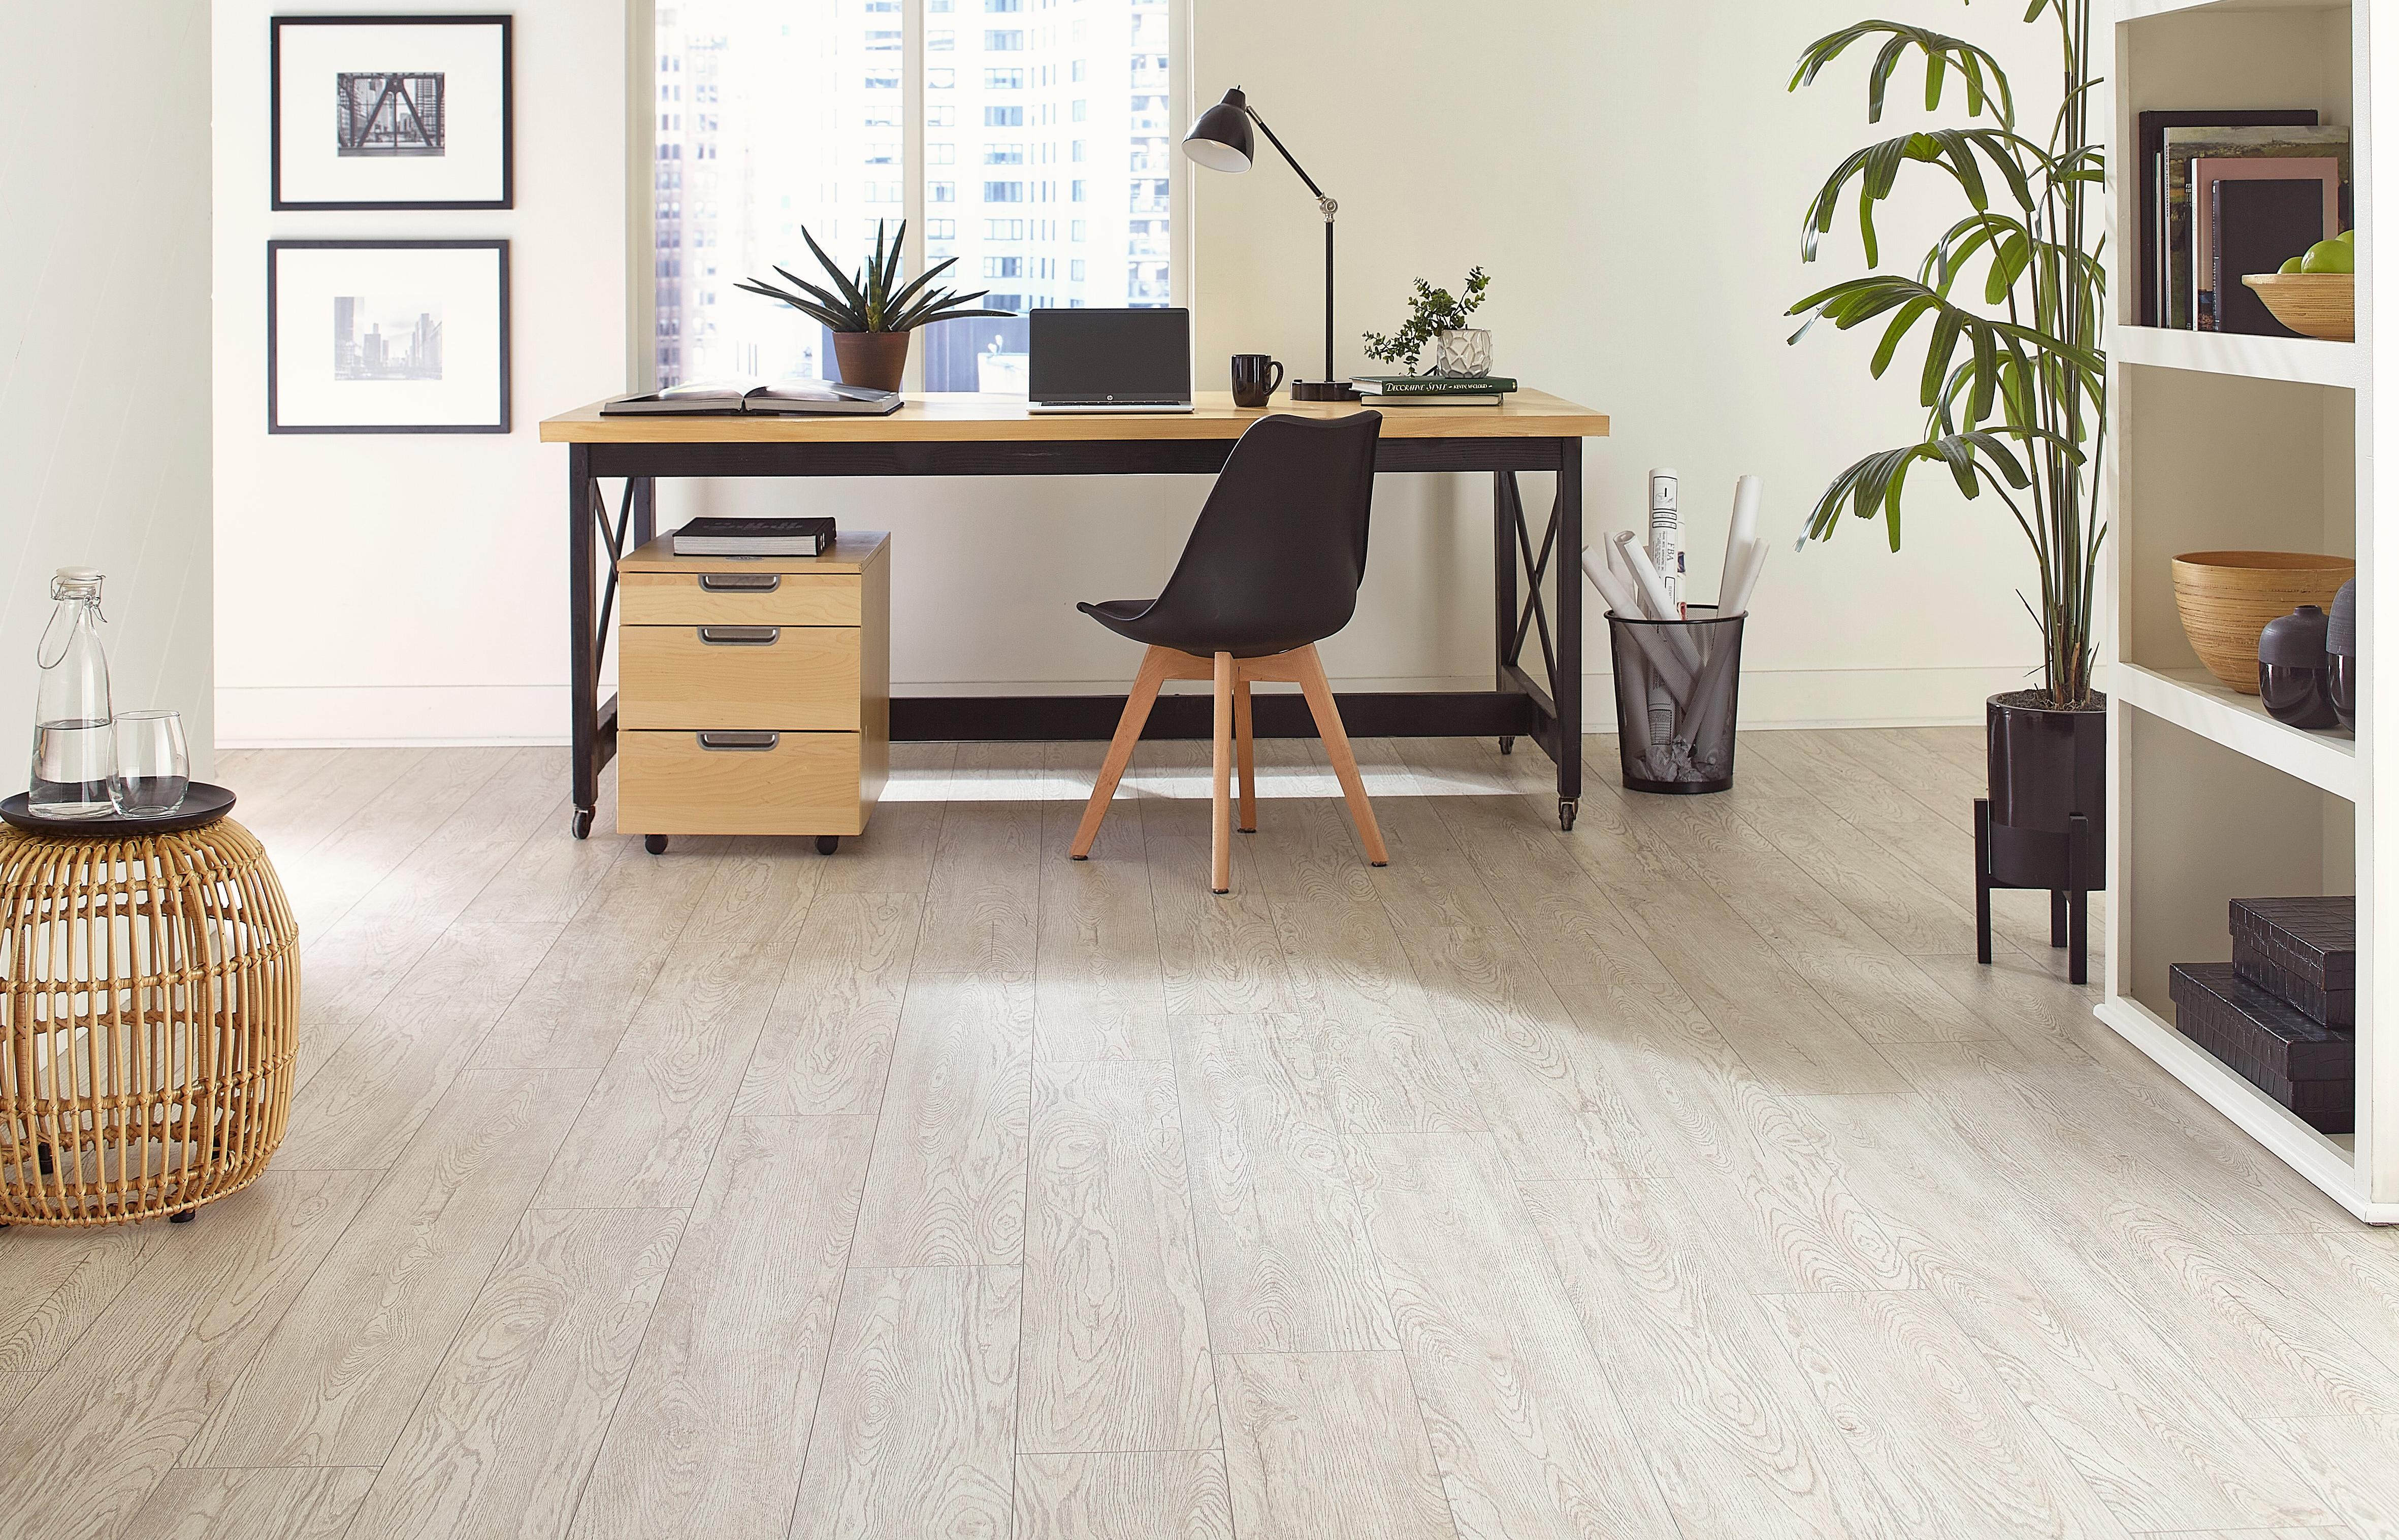 Office with OptiMax Eco-Resilient flooring with Techtanium Plus protection.